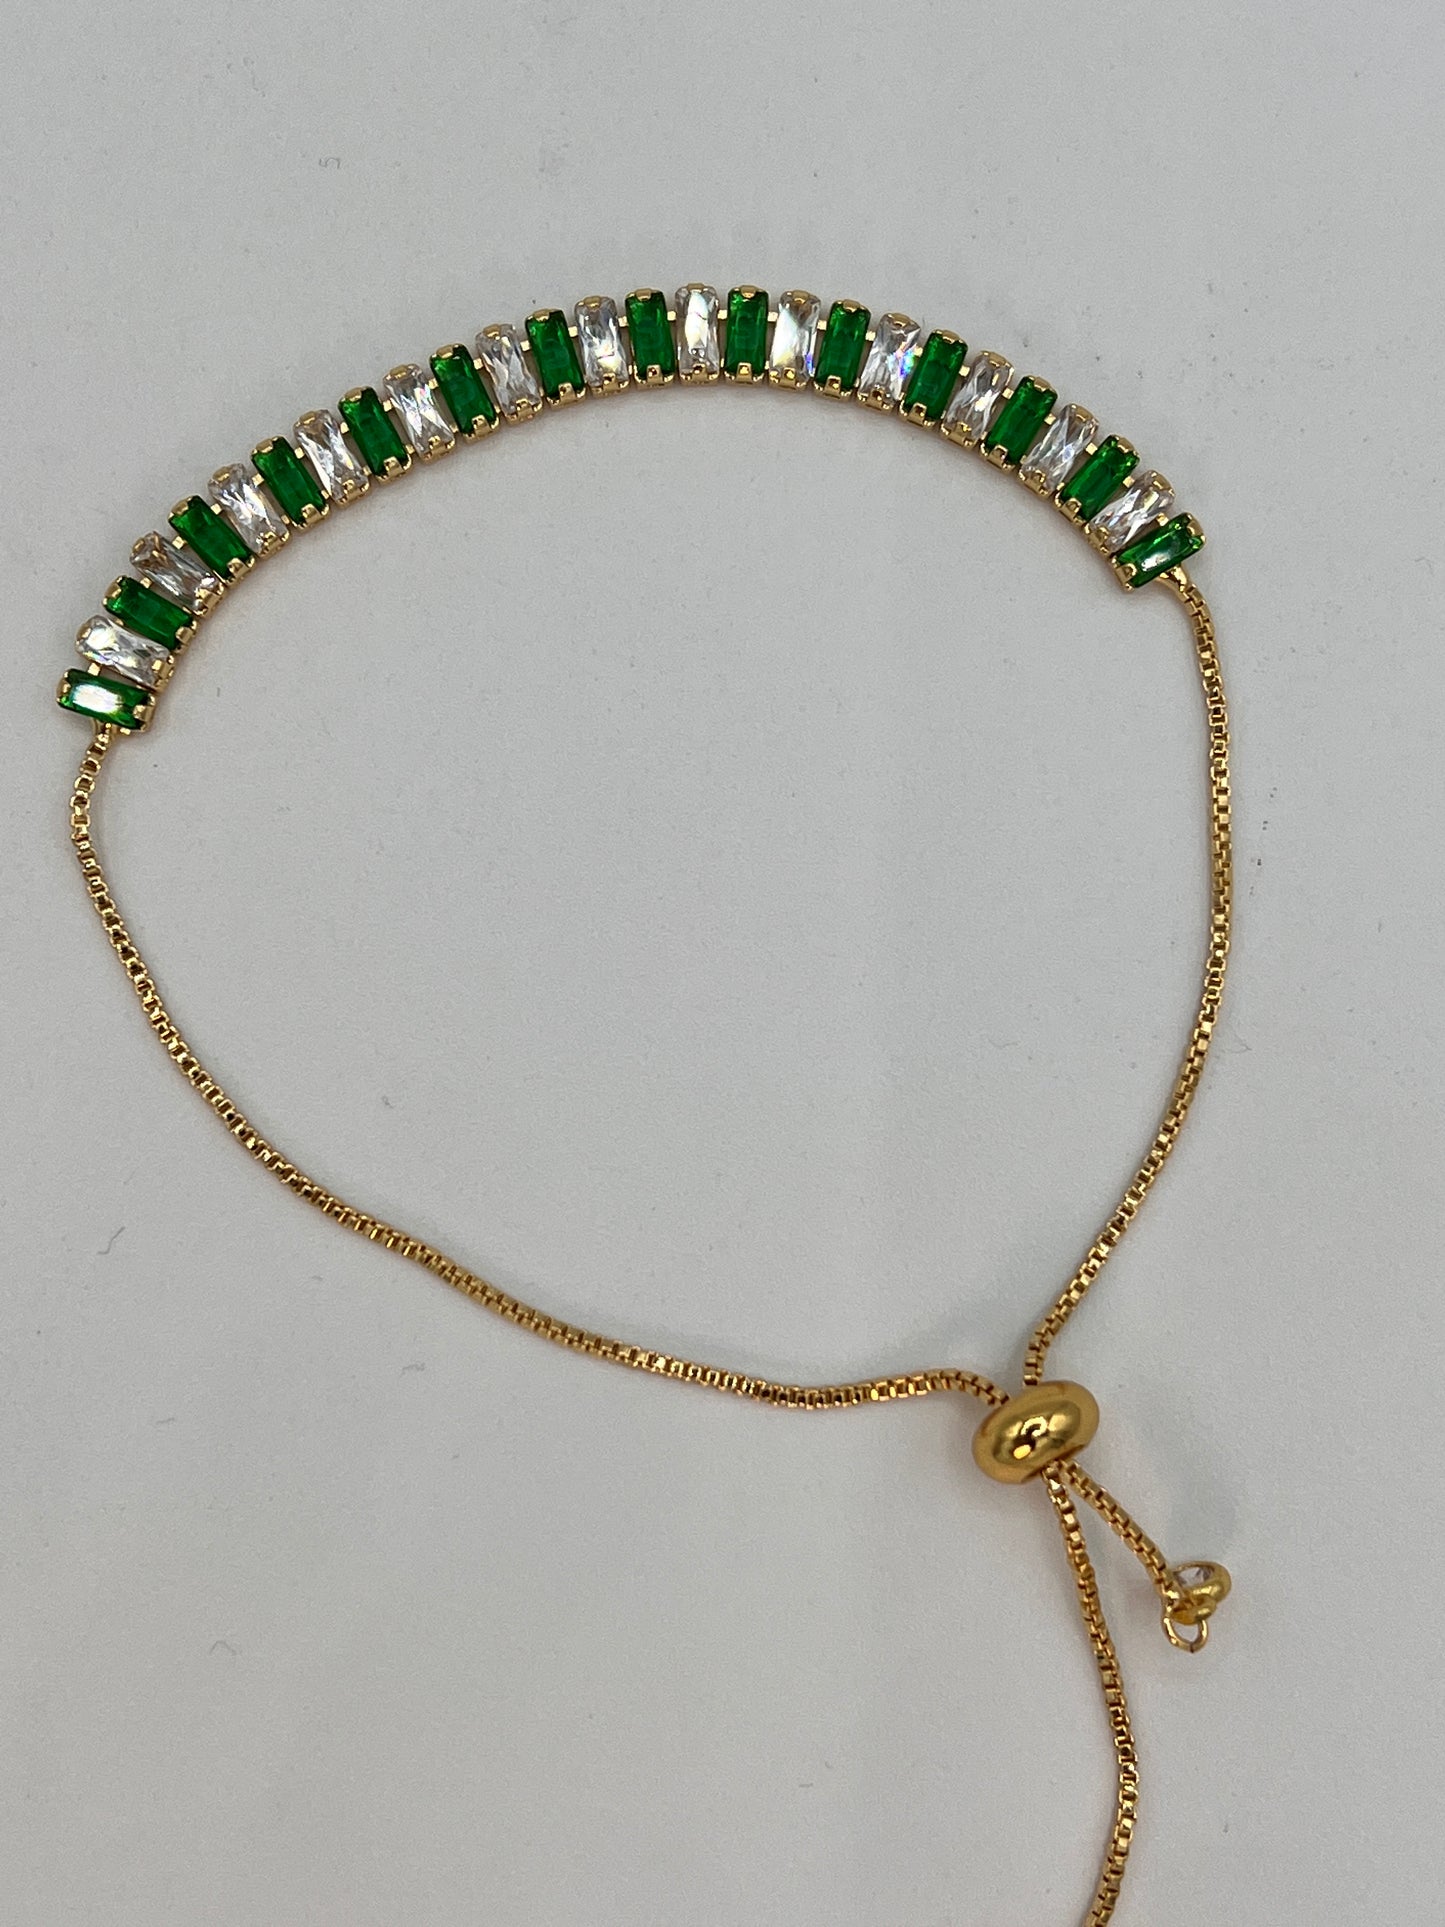 Radiant Charm: Adjustable Emerald and White Zircon Gold Bracelet for Effortless Elegance and Personalized Style